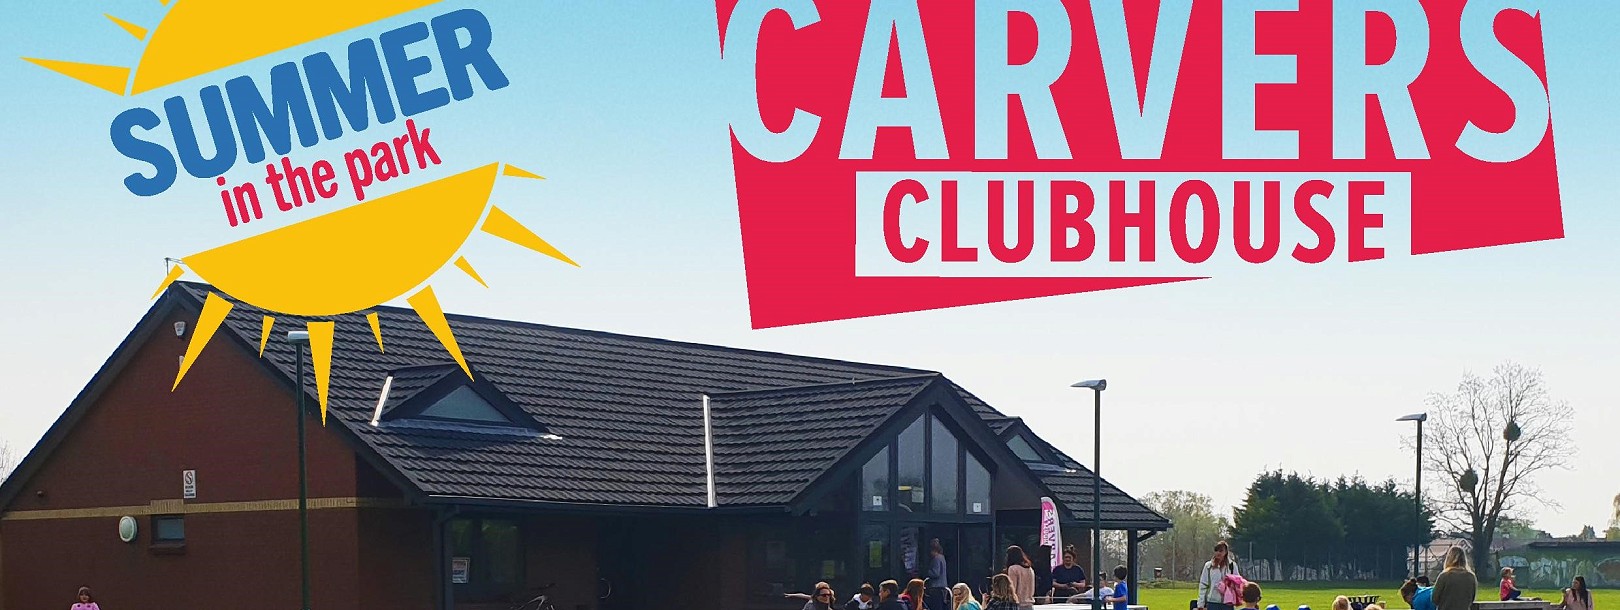 Carver's Clubhouse Kicks Off Summer Programme for Local Families